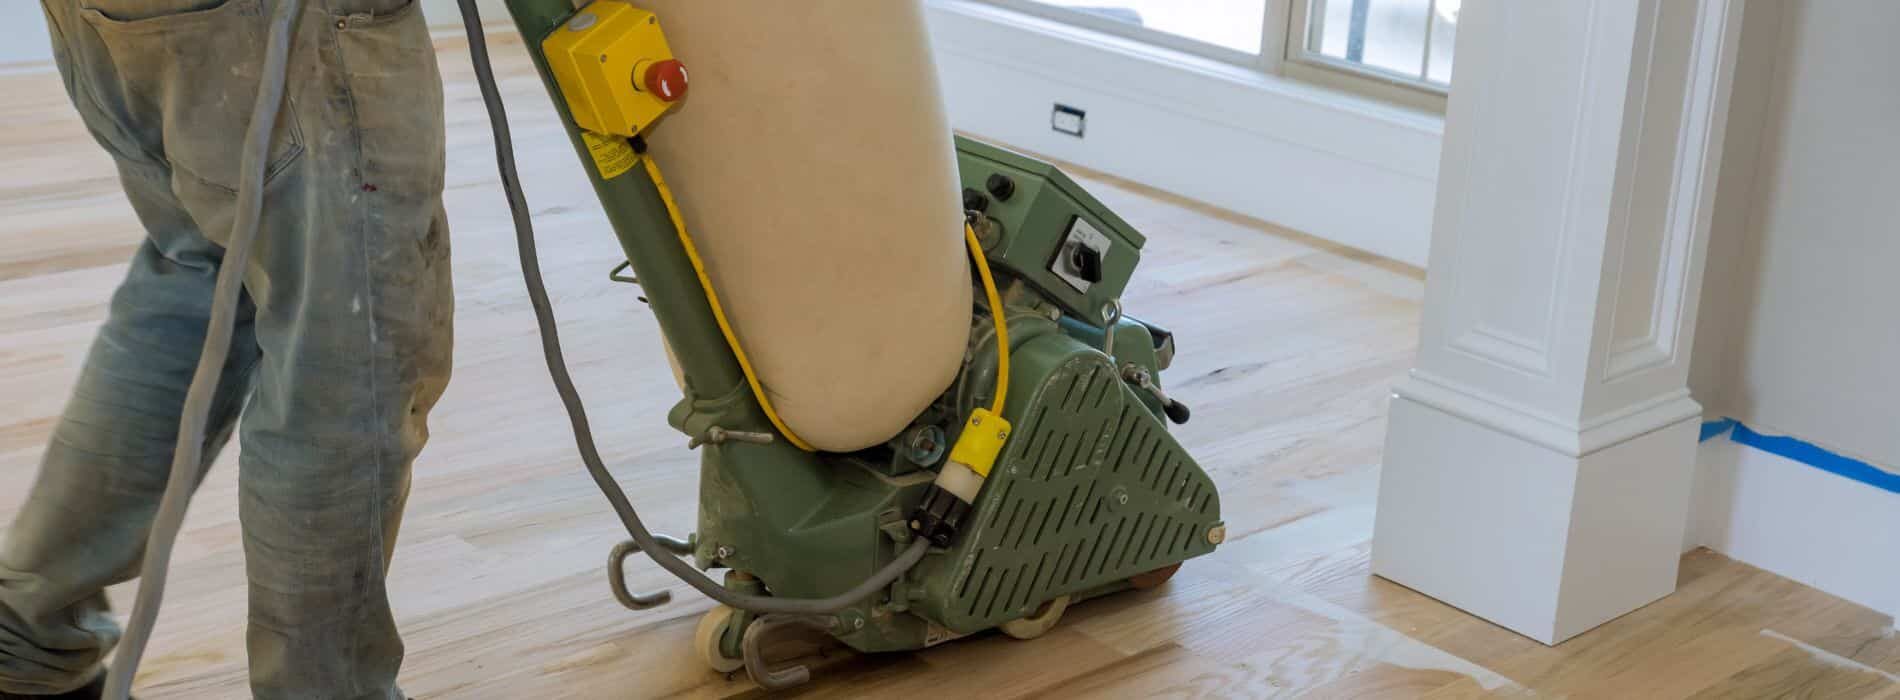 With the use of the versatile 1.5kW Bona Scorpion drum sander, Mr Sander® ensures effective sanding for herringbone floors. Our innovative technique includes a HEPA-filtered dust extraction system, promoting a clean and efficient restoration process.